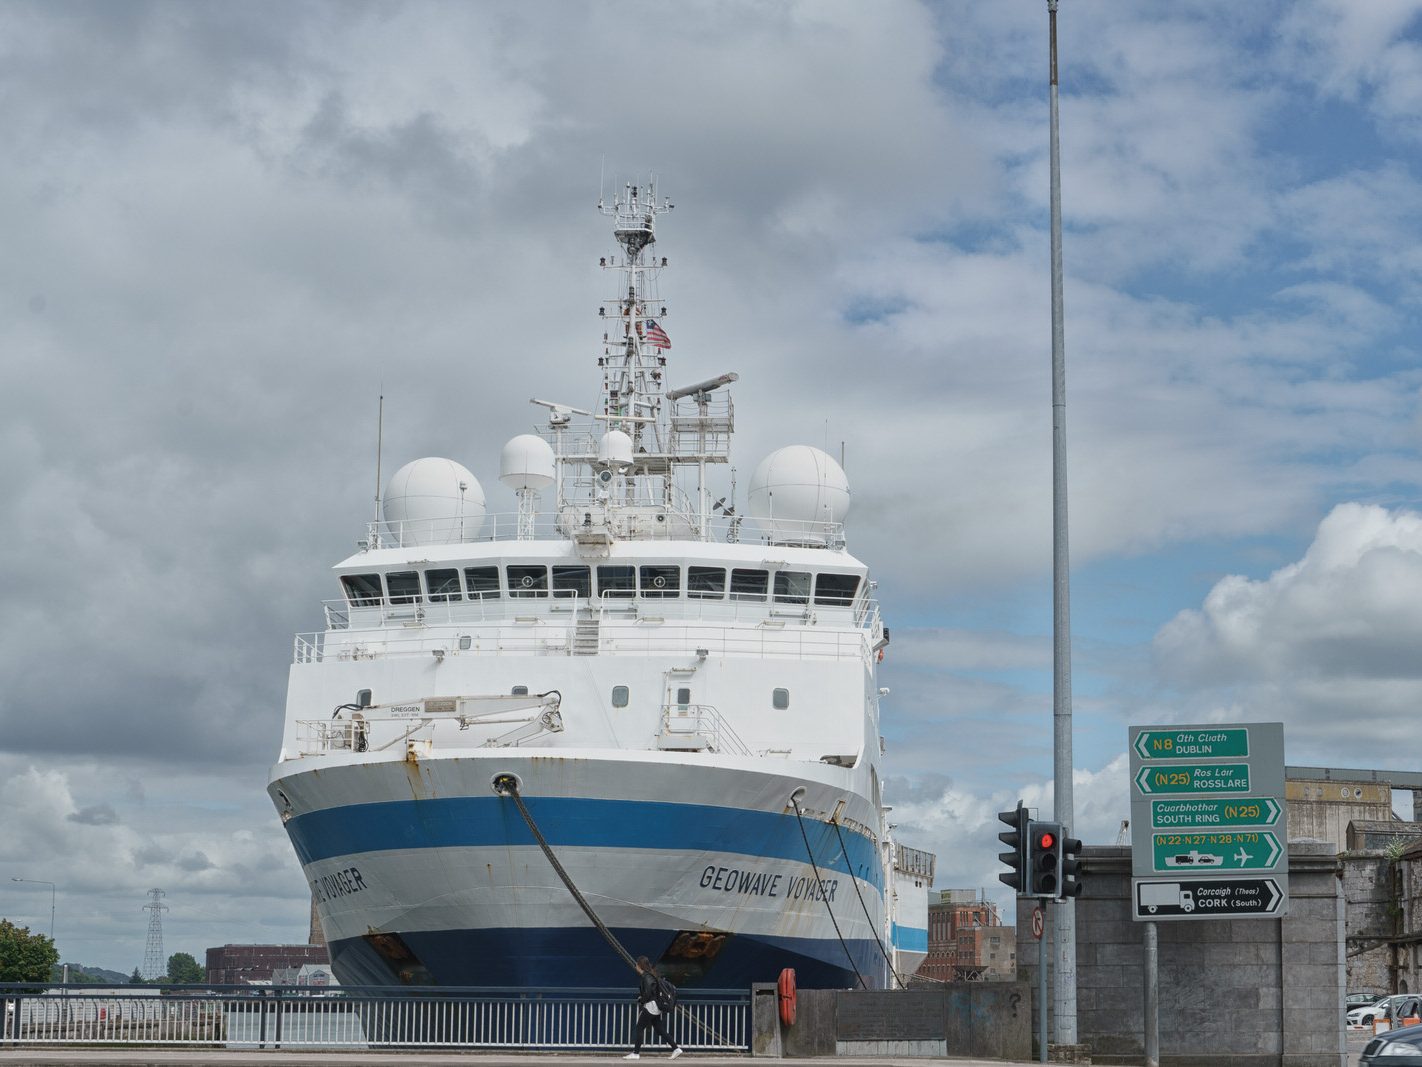 GEOWAVE VOYAGER LATER RENAMED EAGLE EXPLORER IMO 9381299 [AT CUSTOM HOUSE QUAY IN CORK JULY 2016] 015